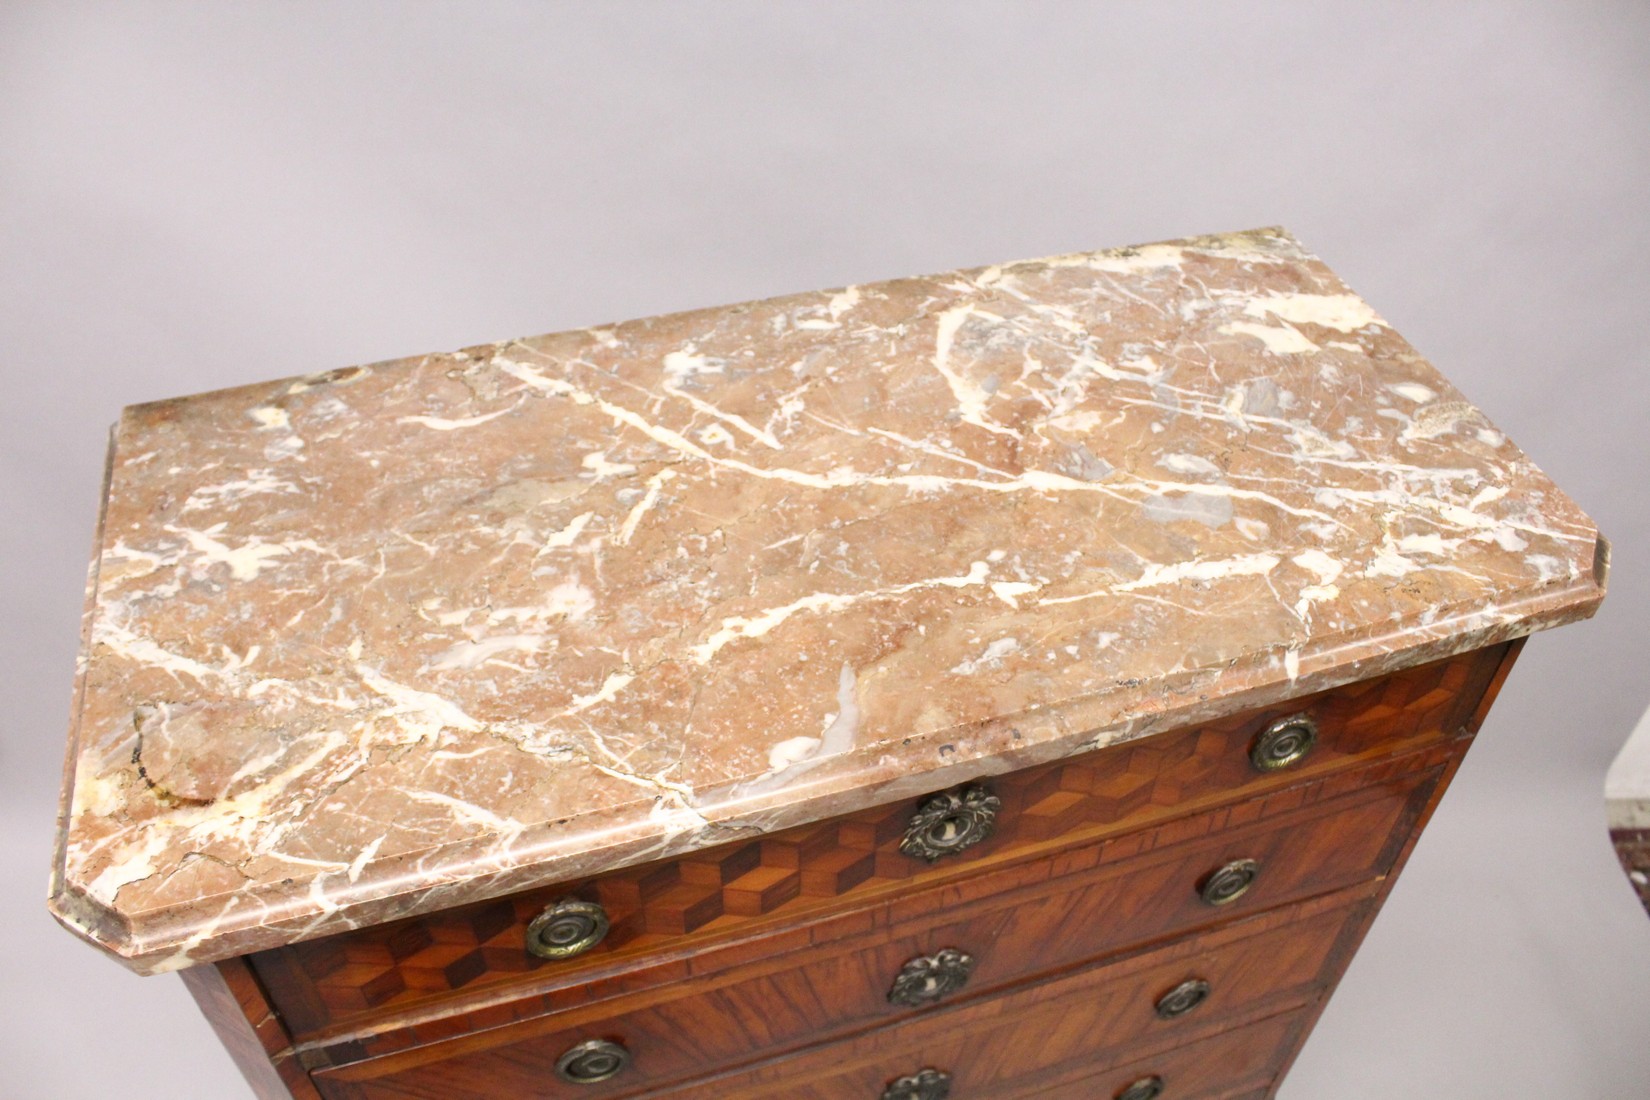 AGOOD 18TH / 19TH CENTURY FRENCH KINGWOOD AND MARBLE TALL CHEST, with a variagated rouge marble top, - Image 4 of 7